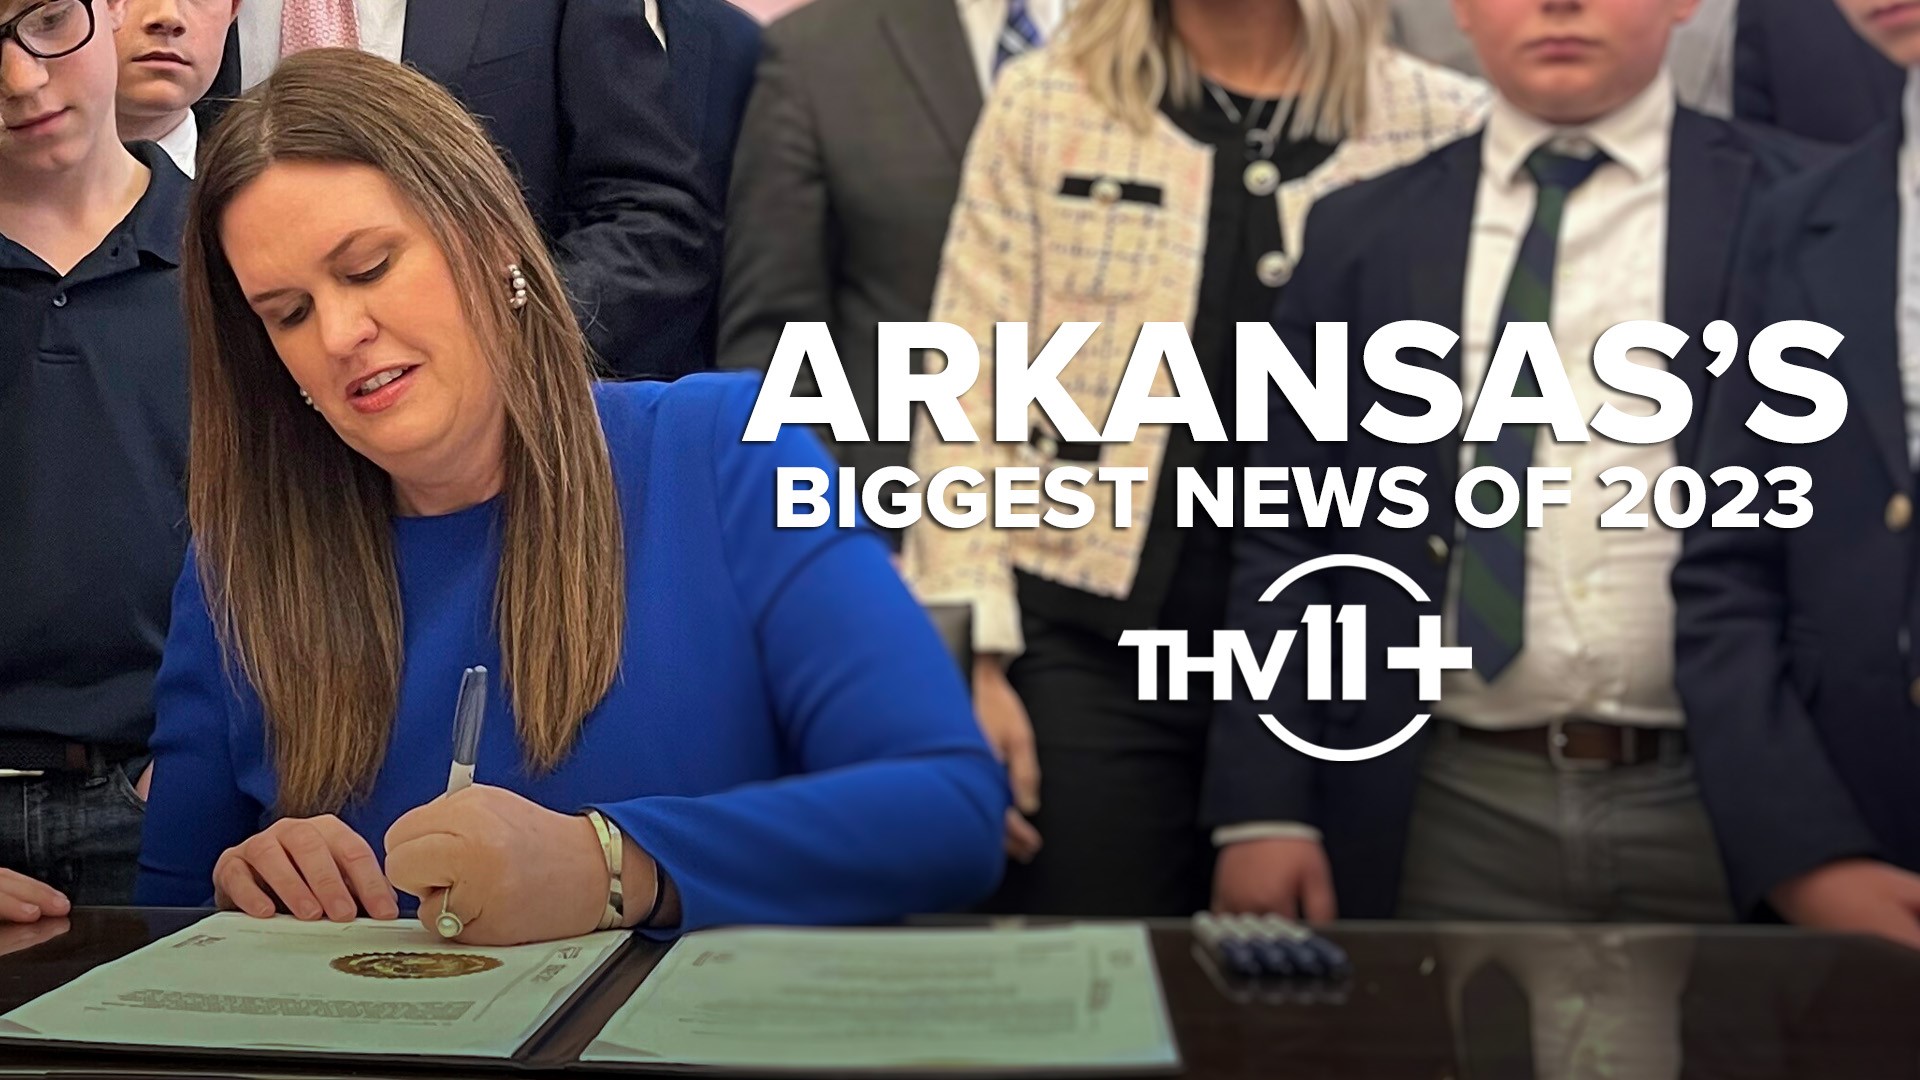 From Sarah Huckabee Sanders enacting new laws to a catastrophic tornado hitting Little Rock, these are the biggest Arkansas news stories of 2023.